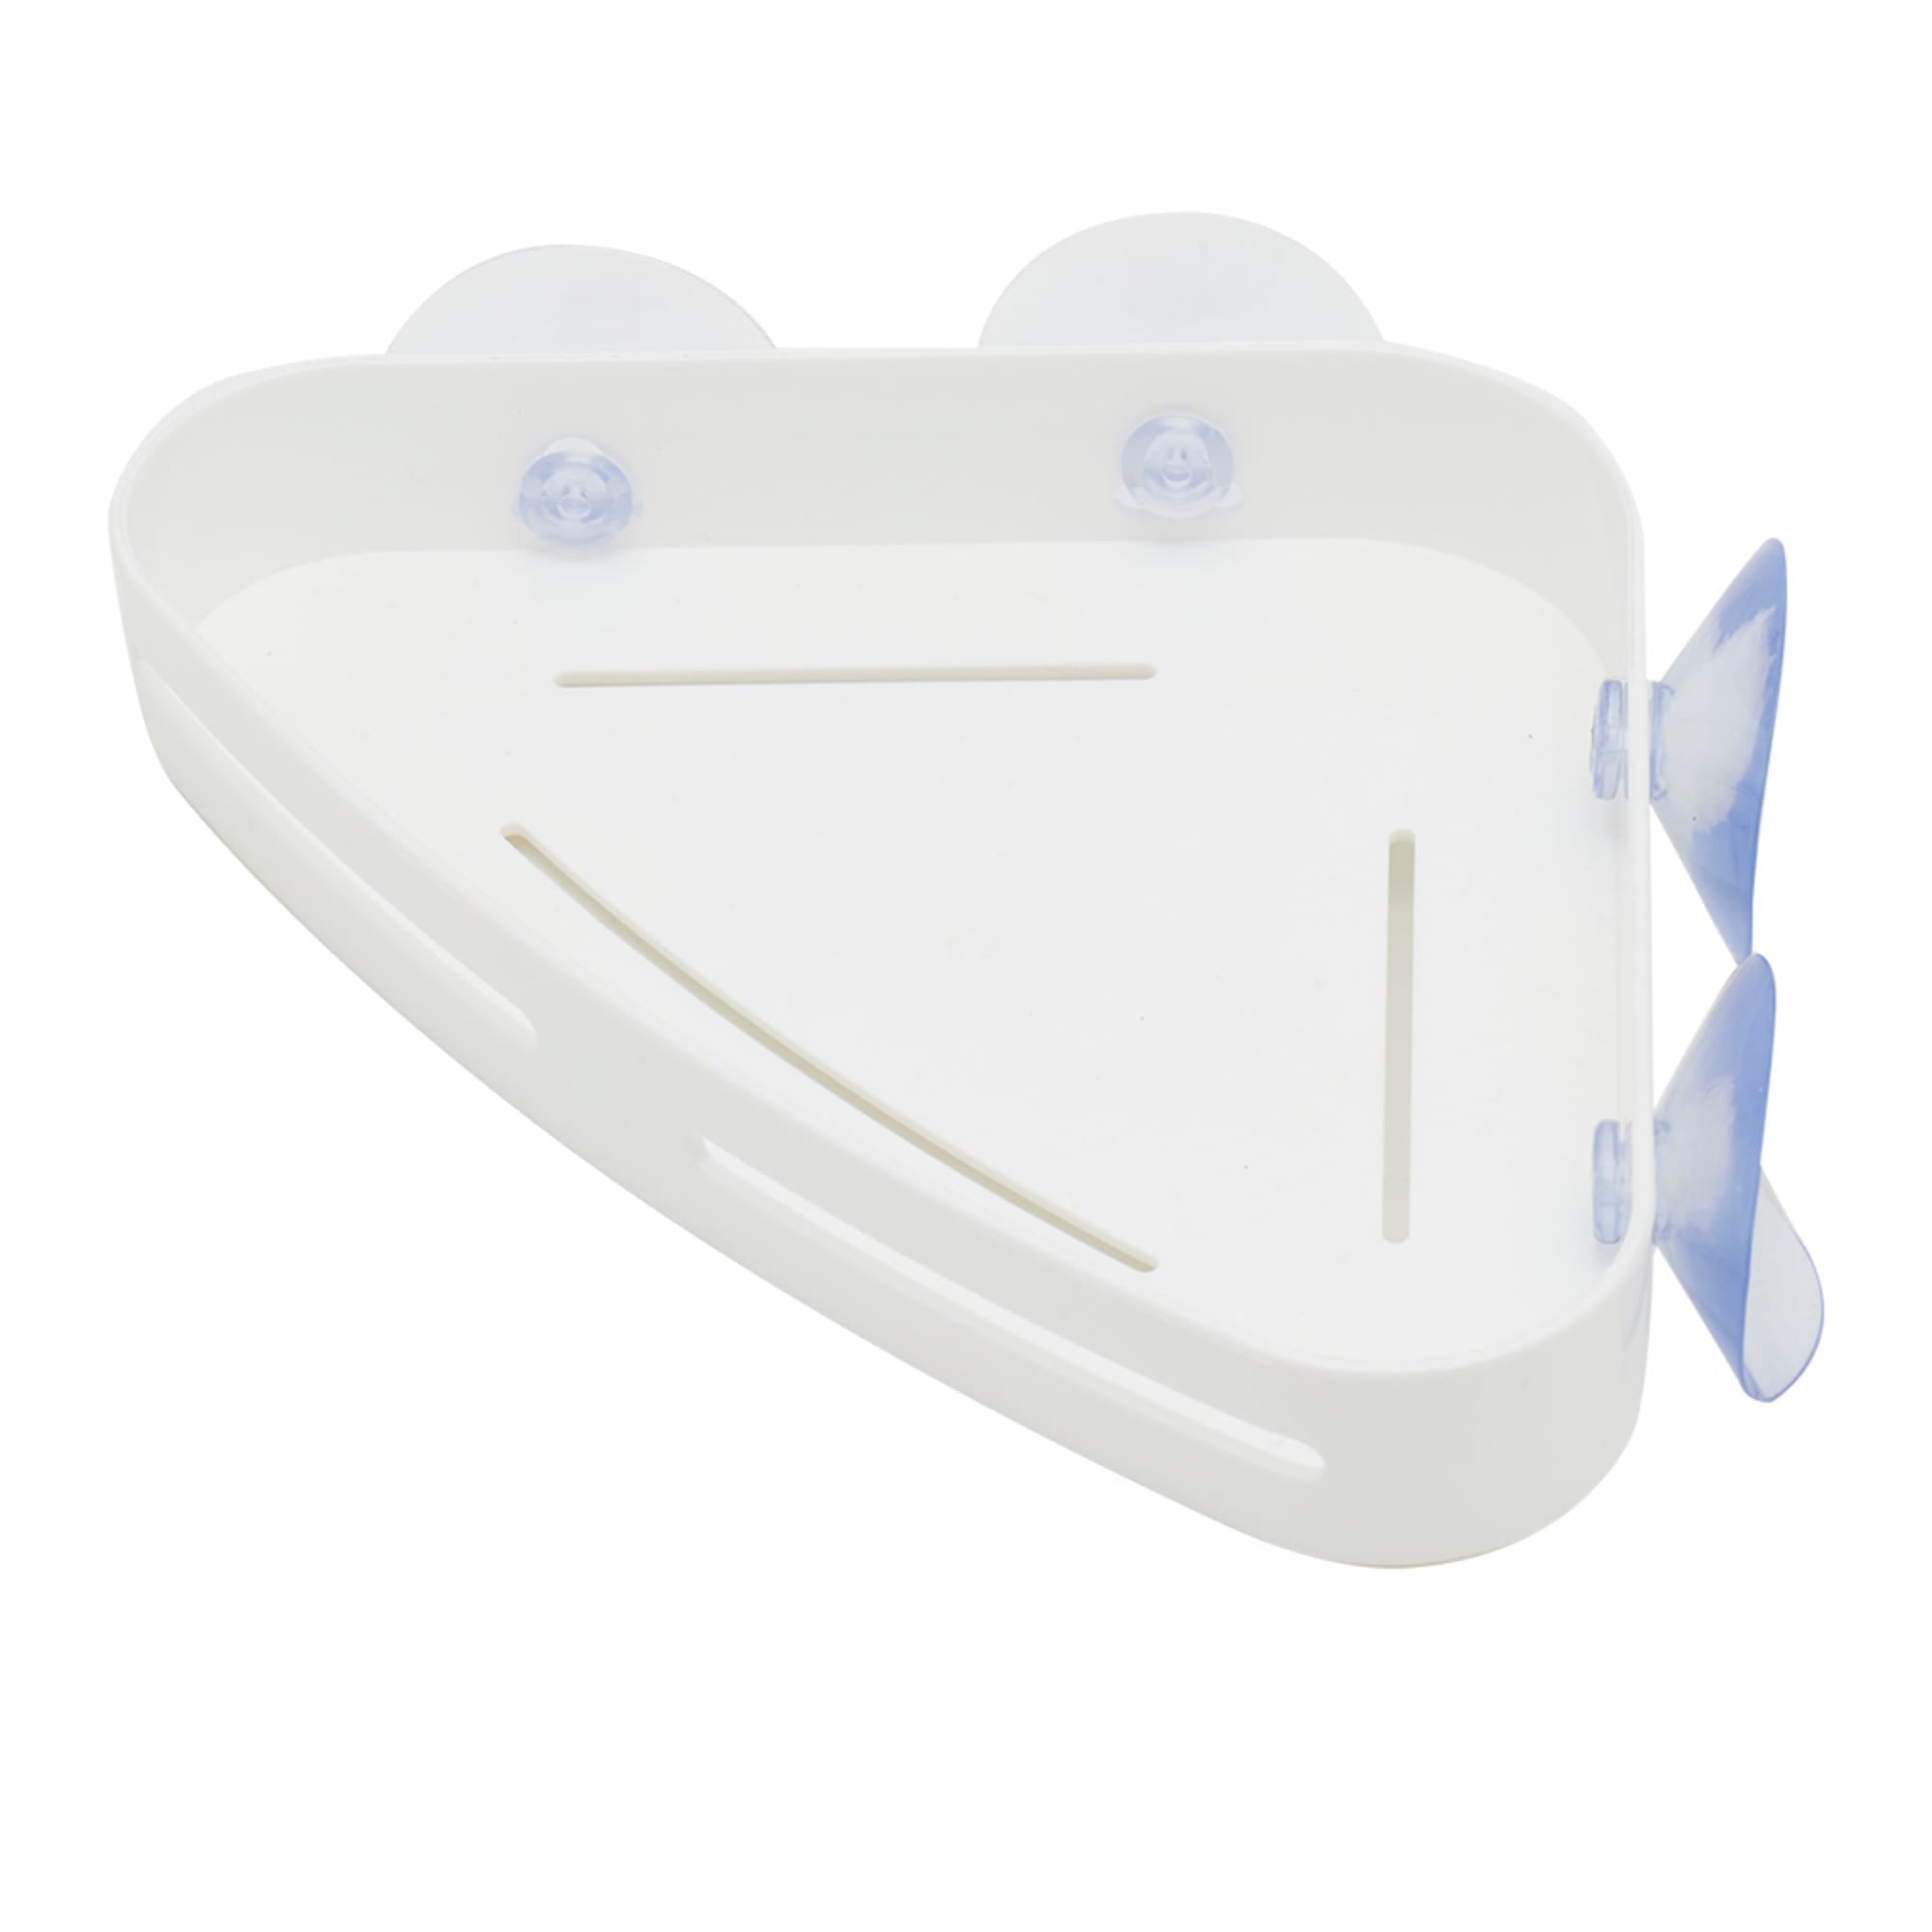 Home Basics Serenity Small Corner Bath Caddy with Suction $2.00 EACH, CASE PACK OF 24